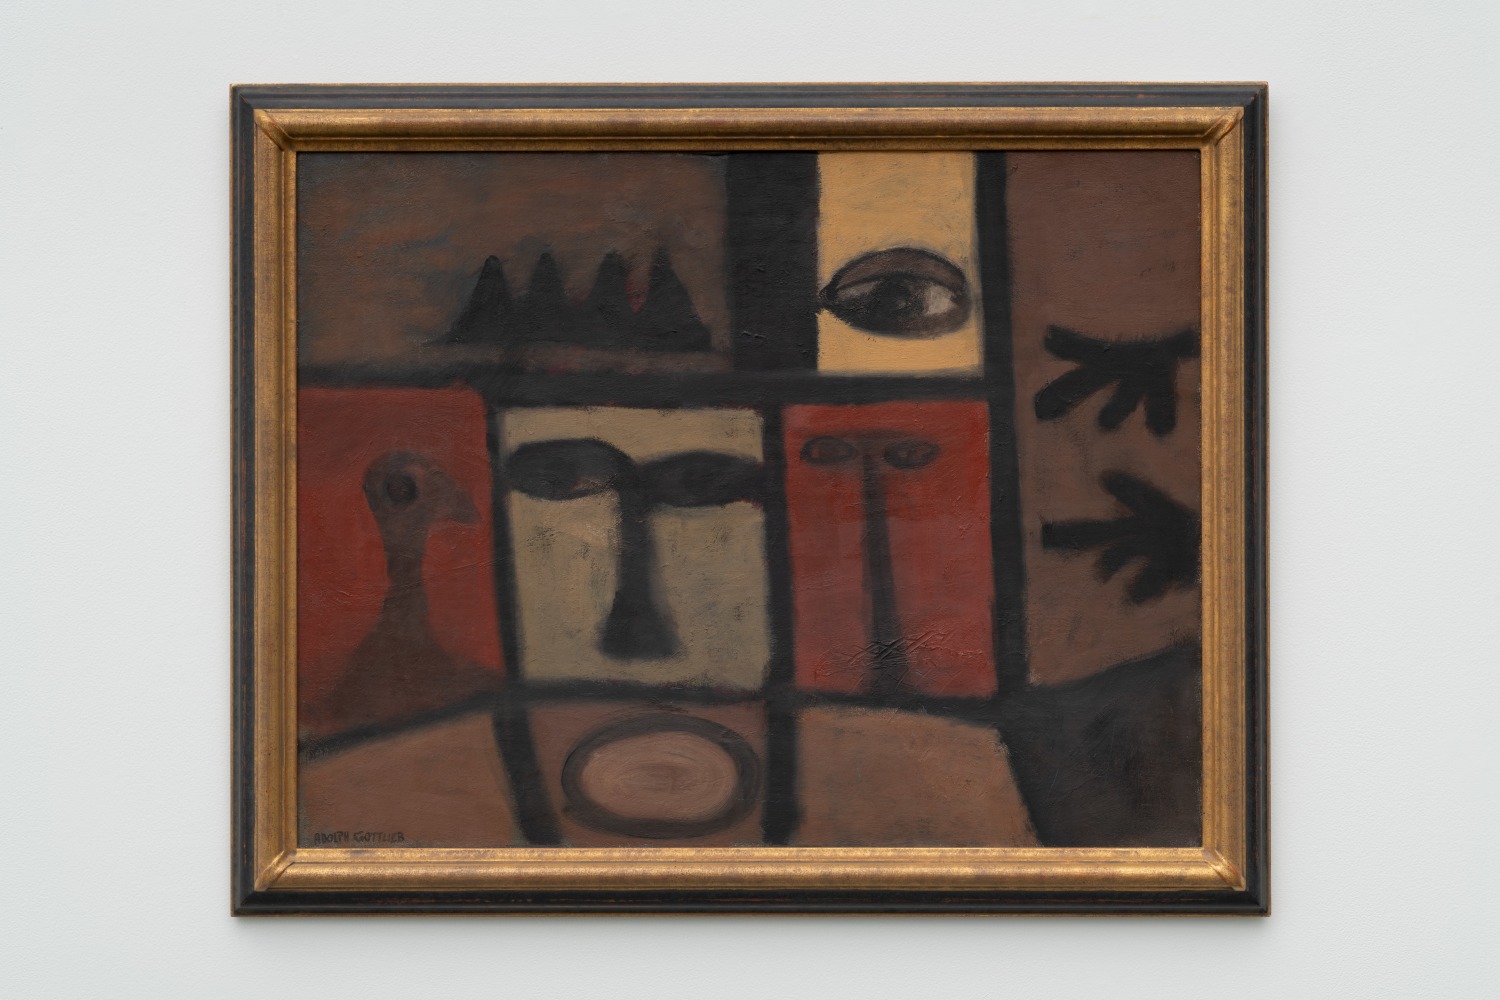 Adolph Gottlieb
Phoenix, 1941
Oil on canvas
24 3/4 &amp;times; 32 inches (62.9 &amp;times; 81.3 cm)